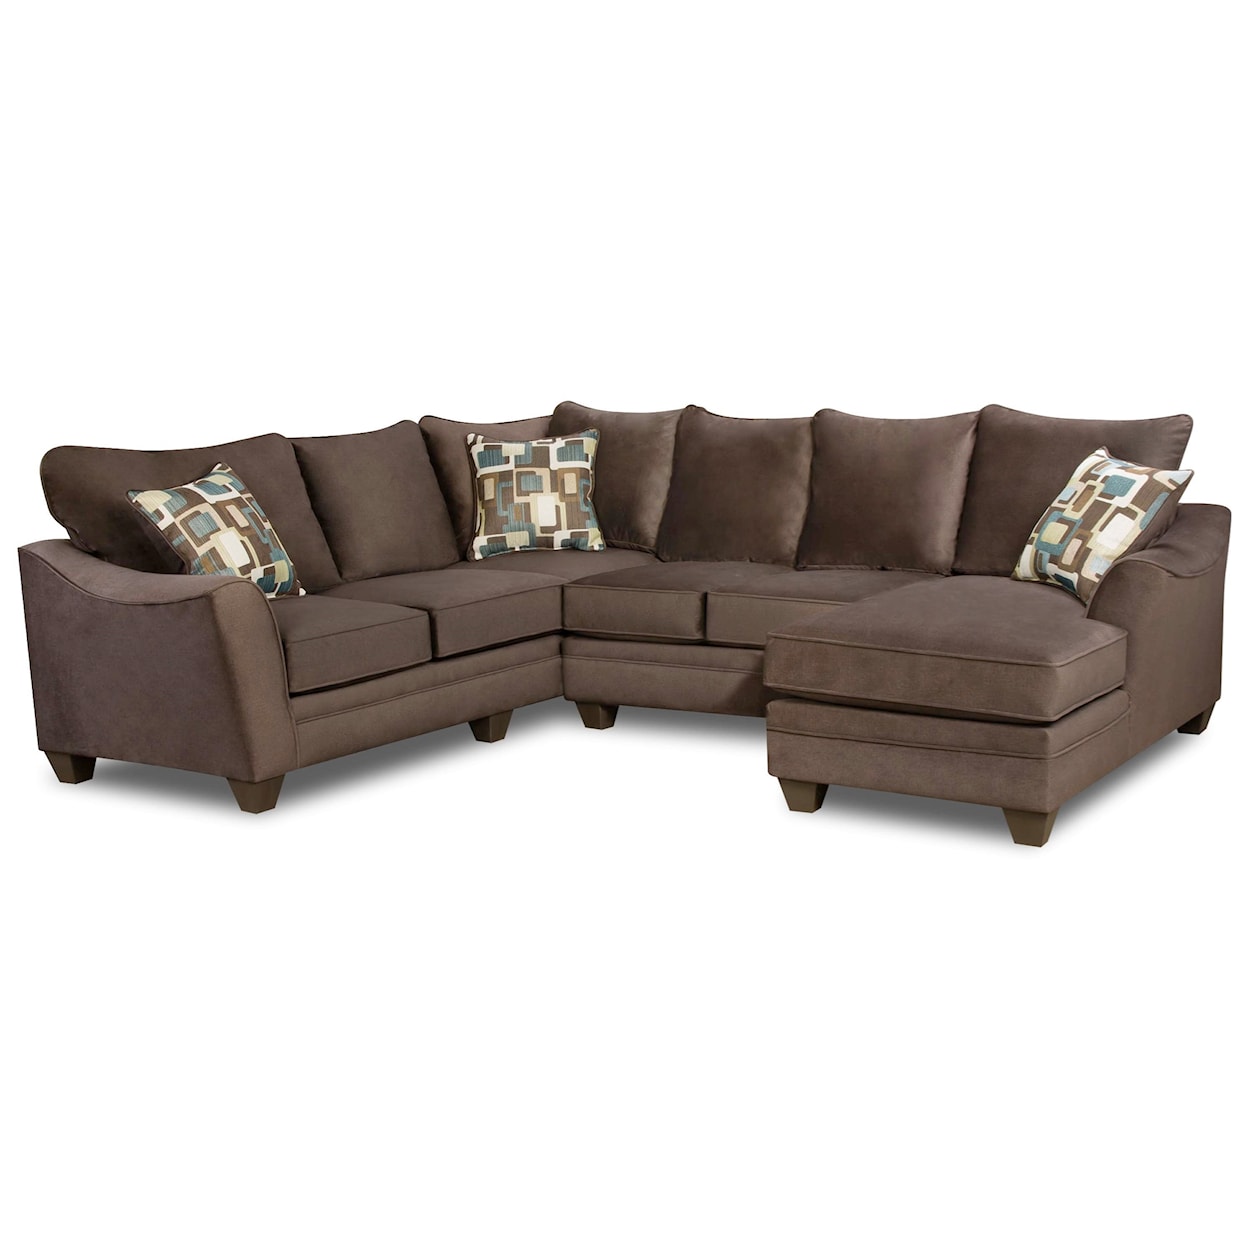 Peak Living 3810 Sectional Sofa with 5 Seats